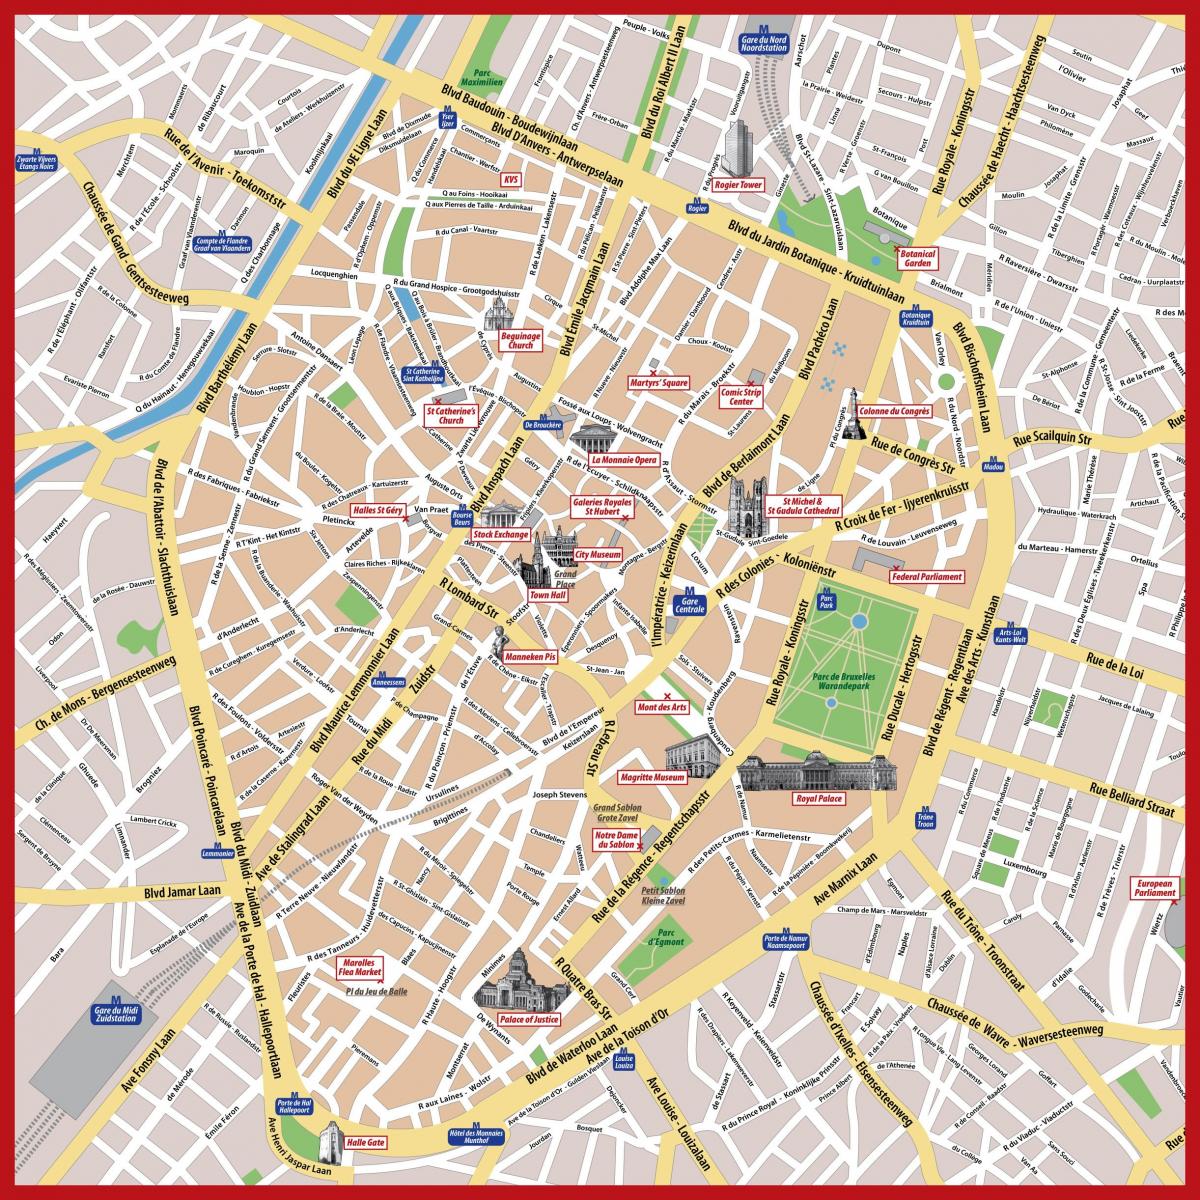 central Brussels street map